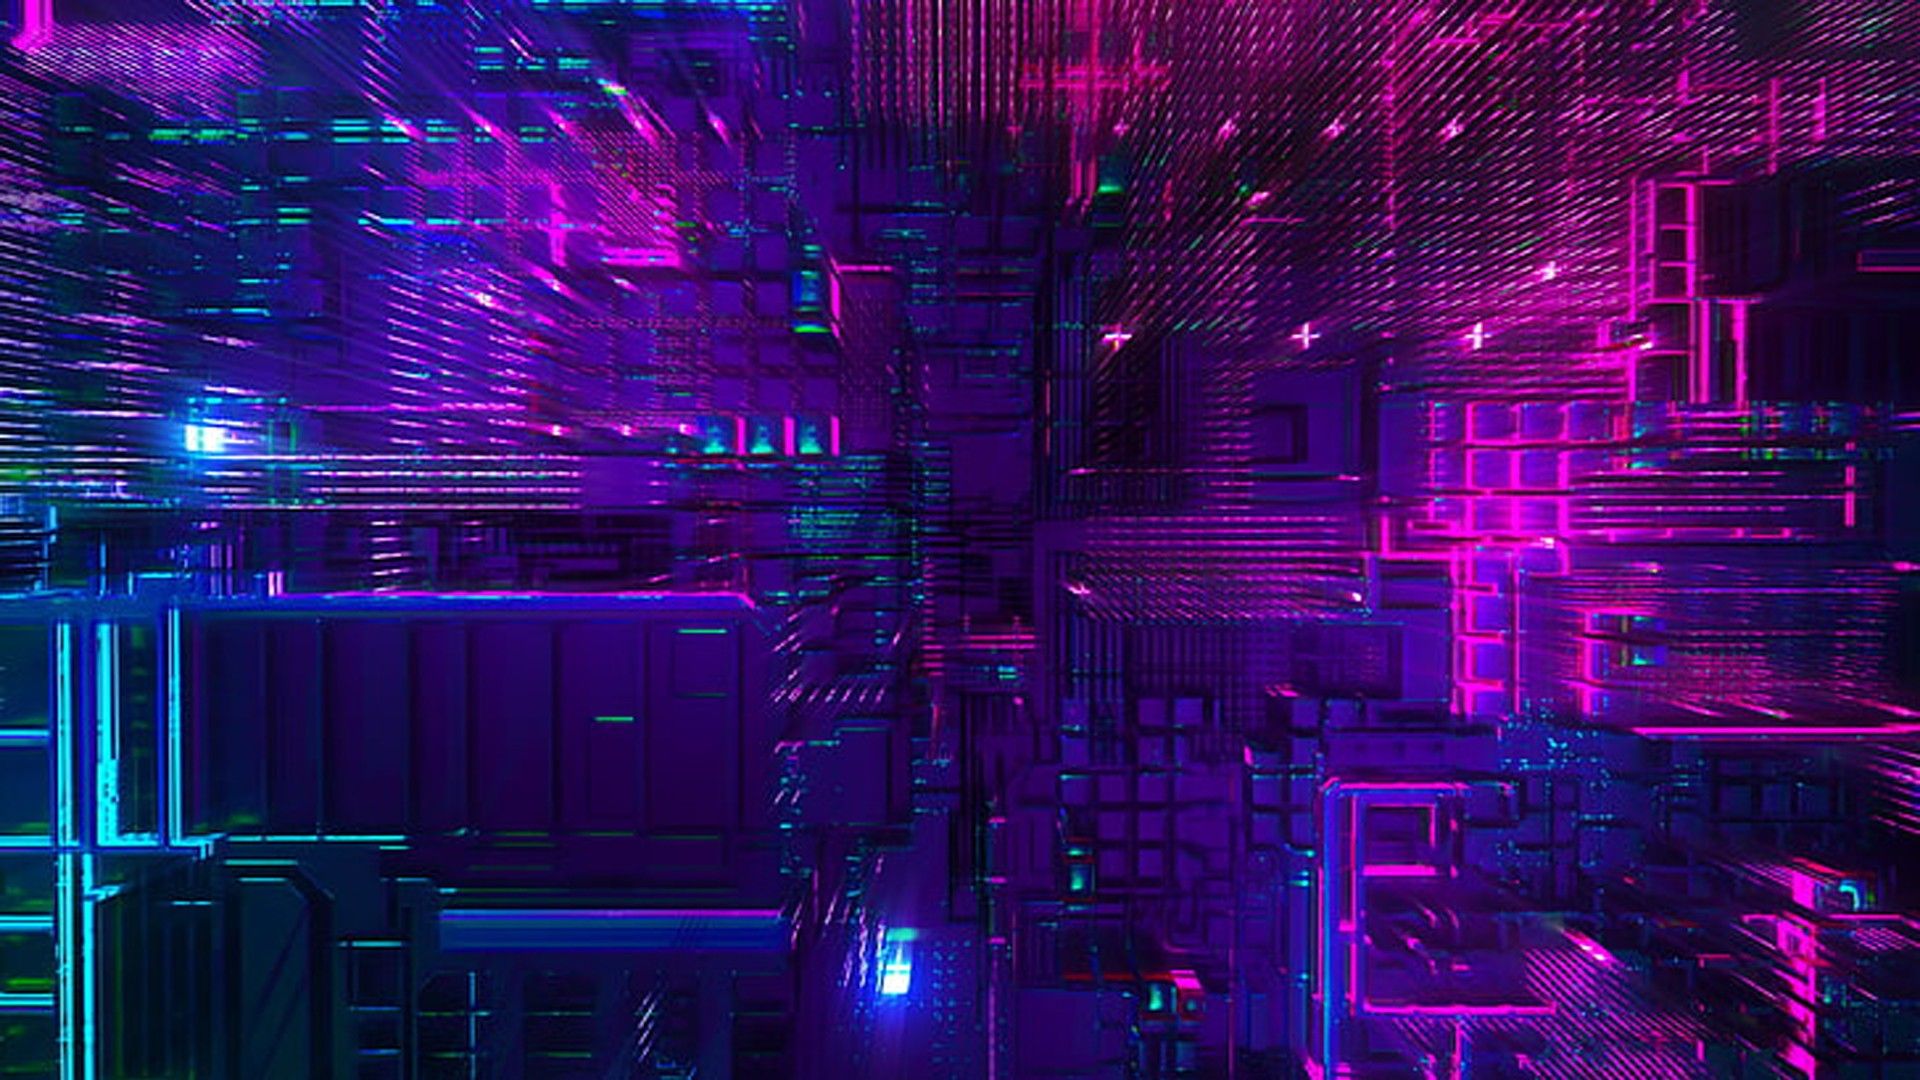 A futuristic city with neon lights and buildings - Neon pink, technology